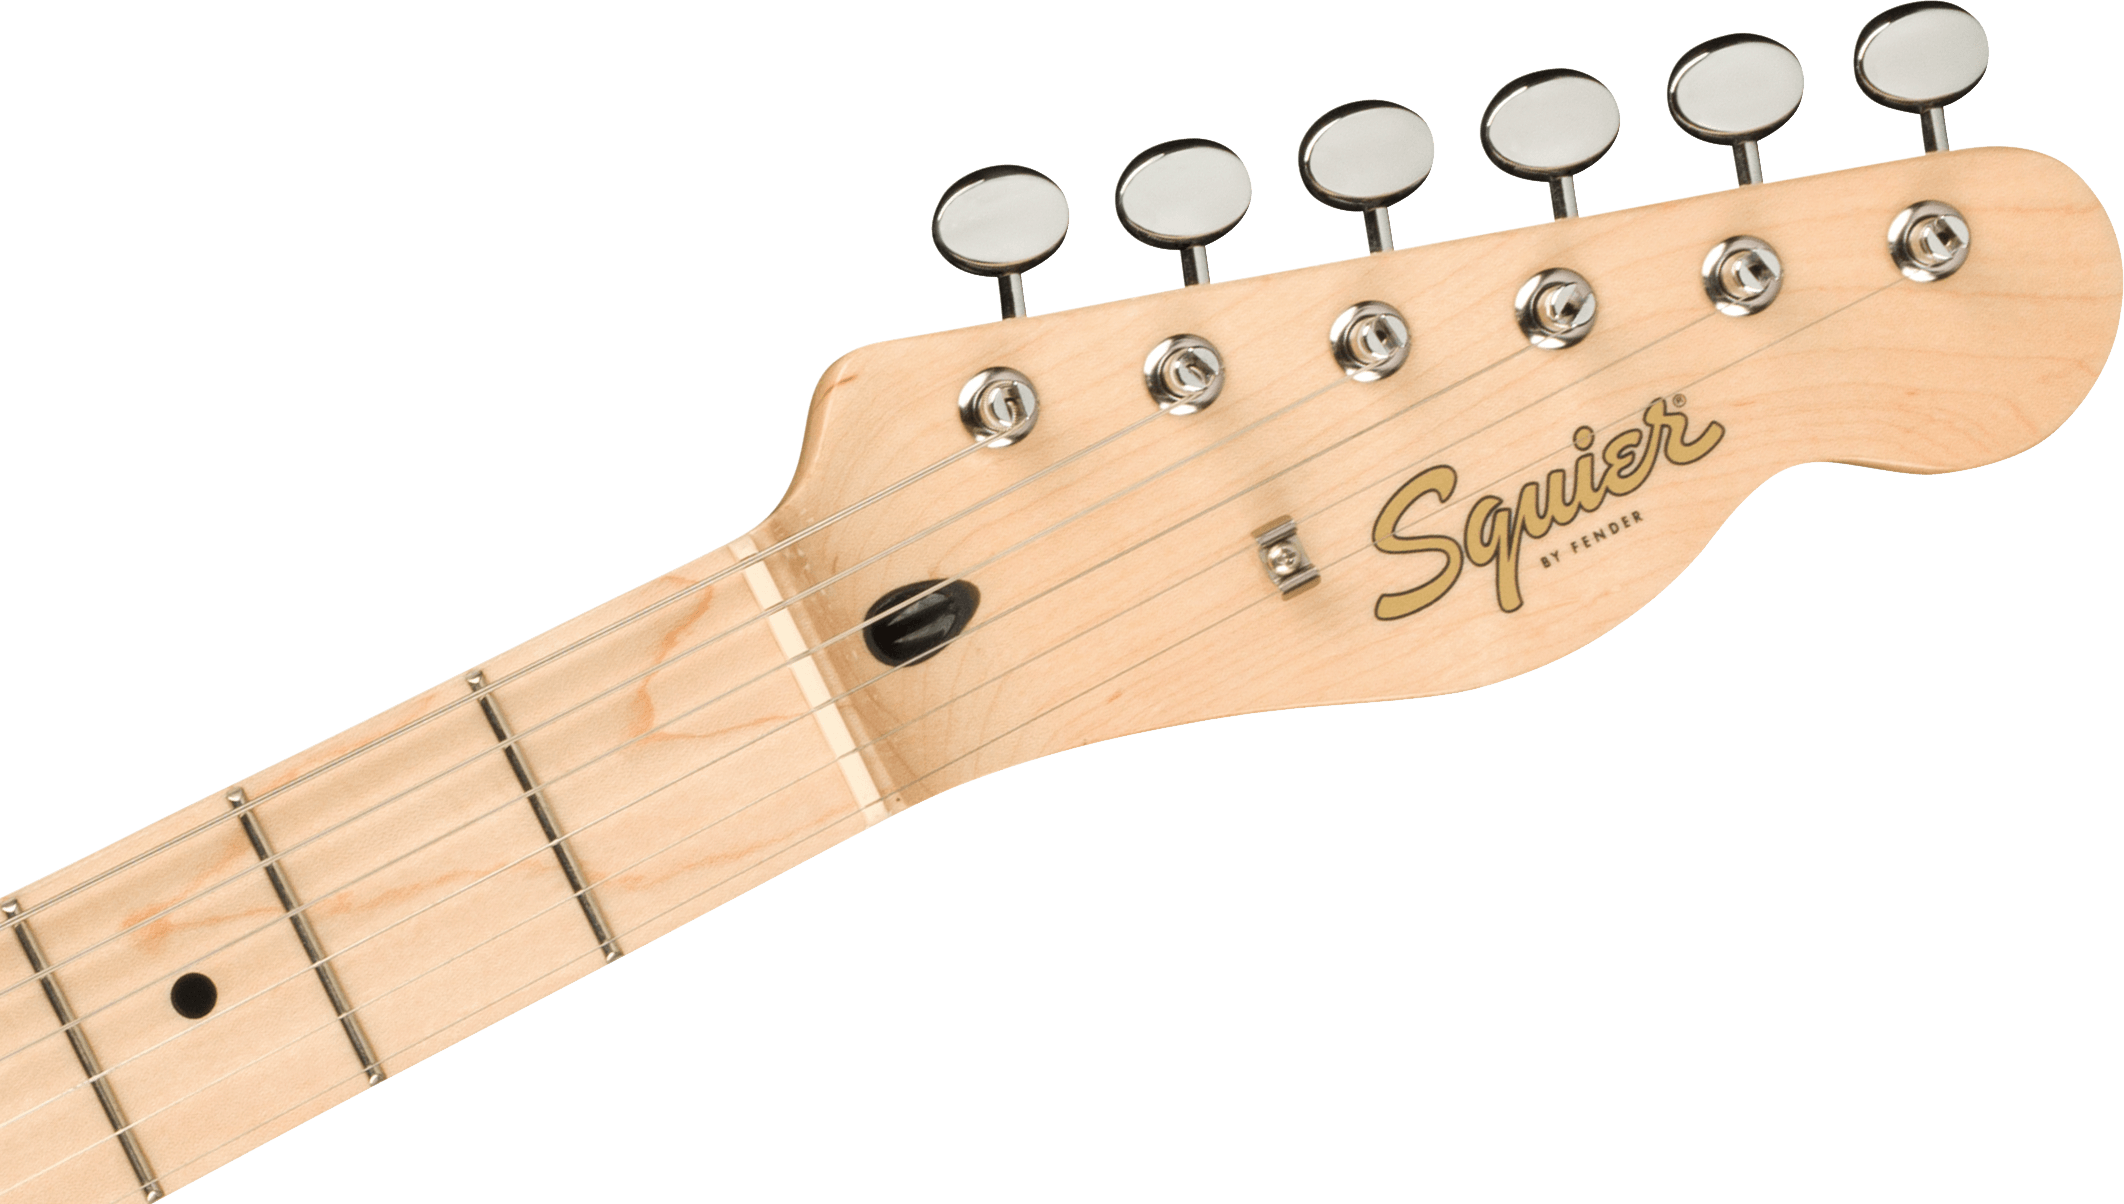 Squier Tele Offset Paranormal Ss Ht Mn - Olympic White - Guitarra electrica retro rock - Variation 3